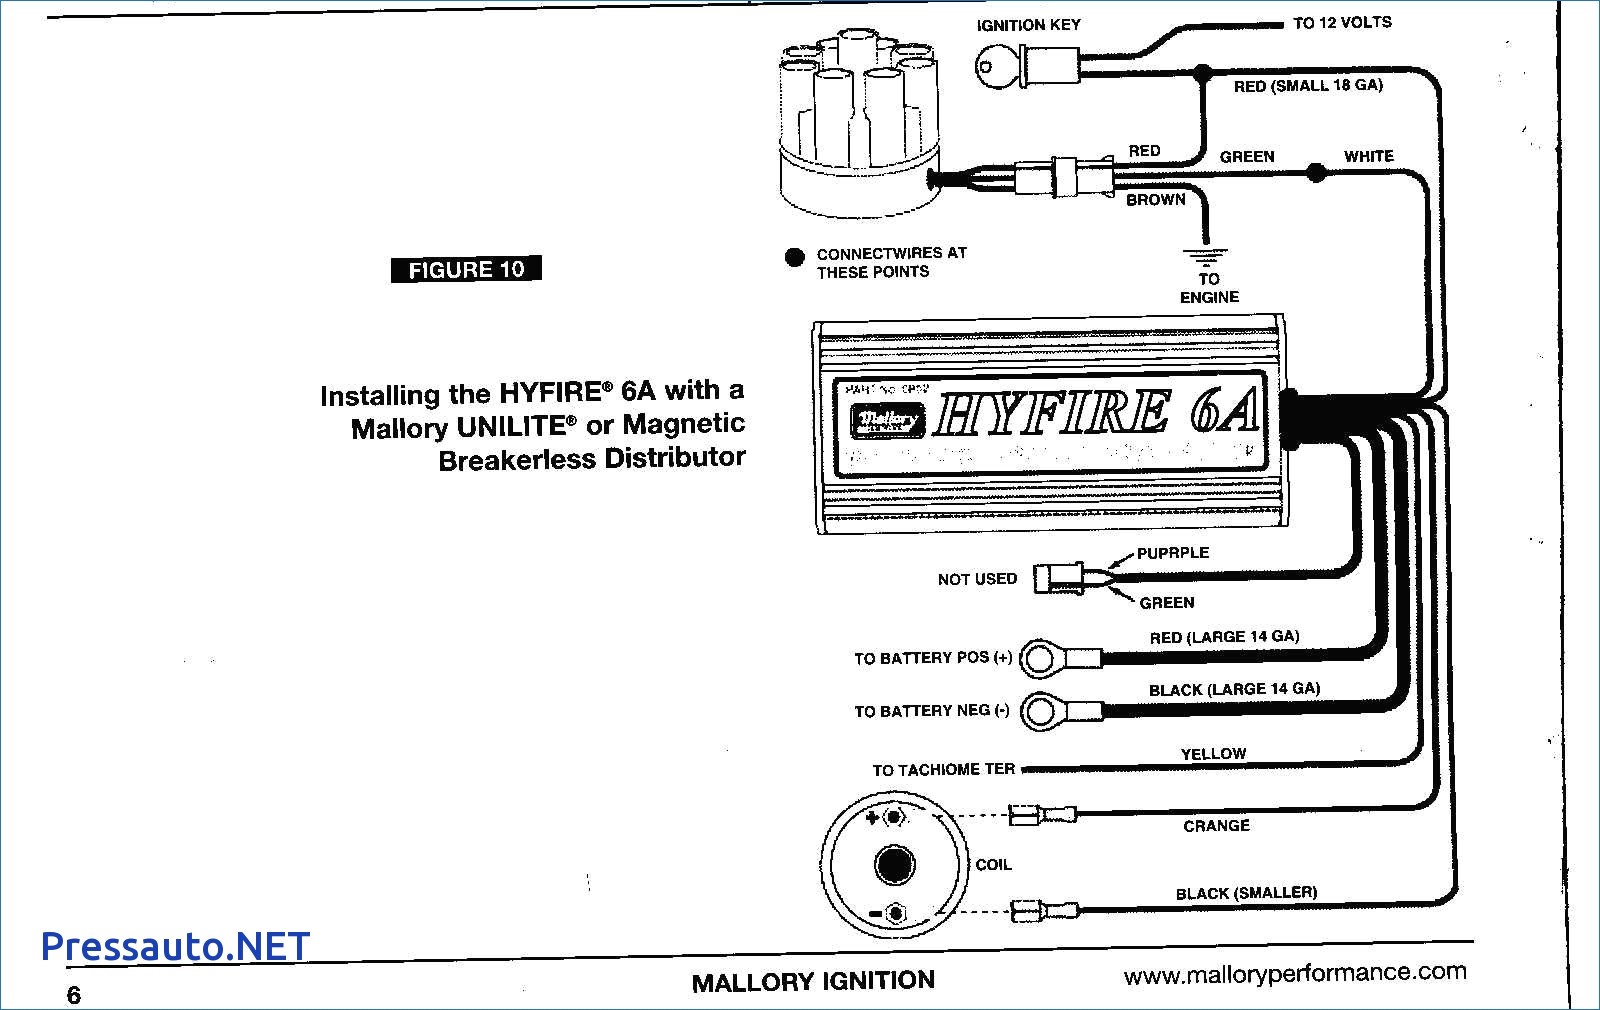 Mallory Ignition Wiring Diagram Harley Life Style By Modernstork Throughout